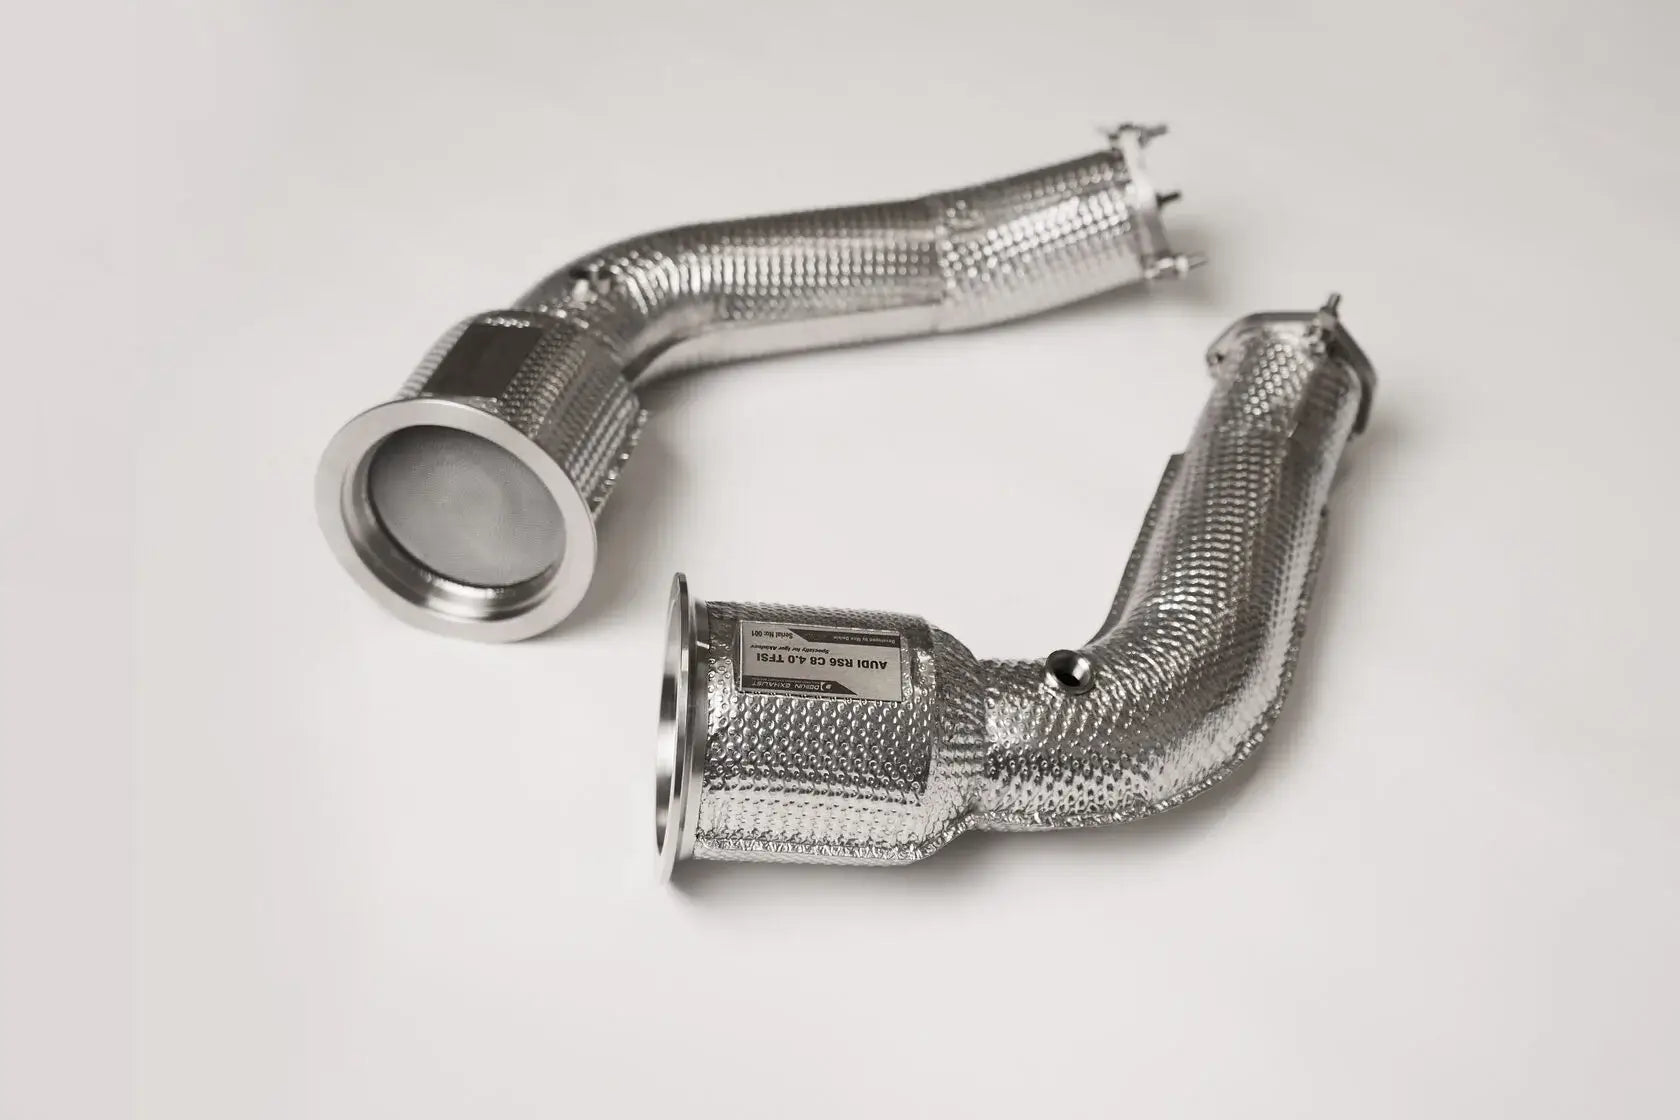 DEIKIN 10-AUDI.RS6.C8-DP Downpipe for AUDI RS6 (C8) without HeatShield Photo-0 